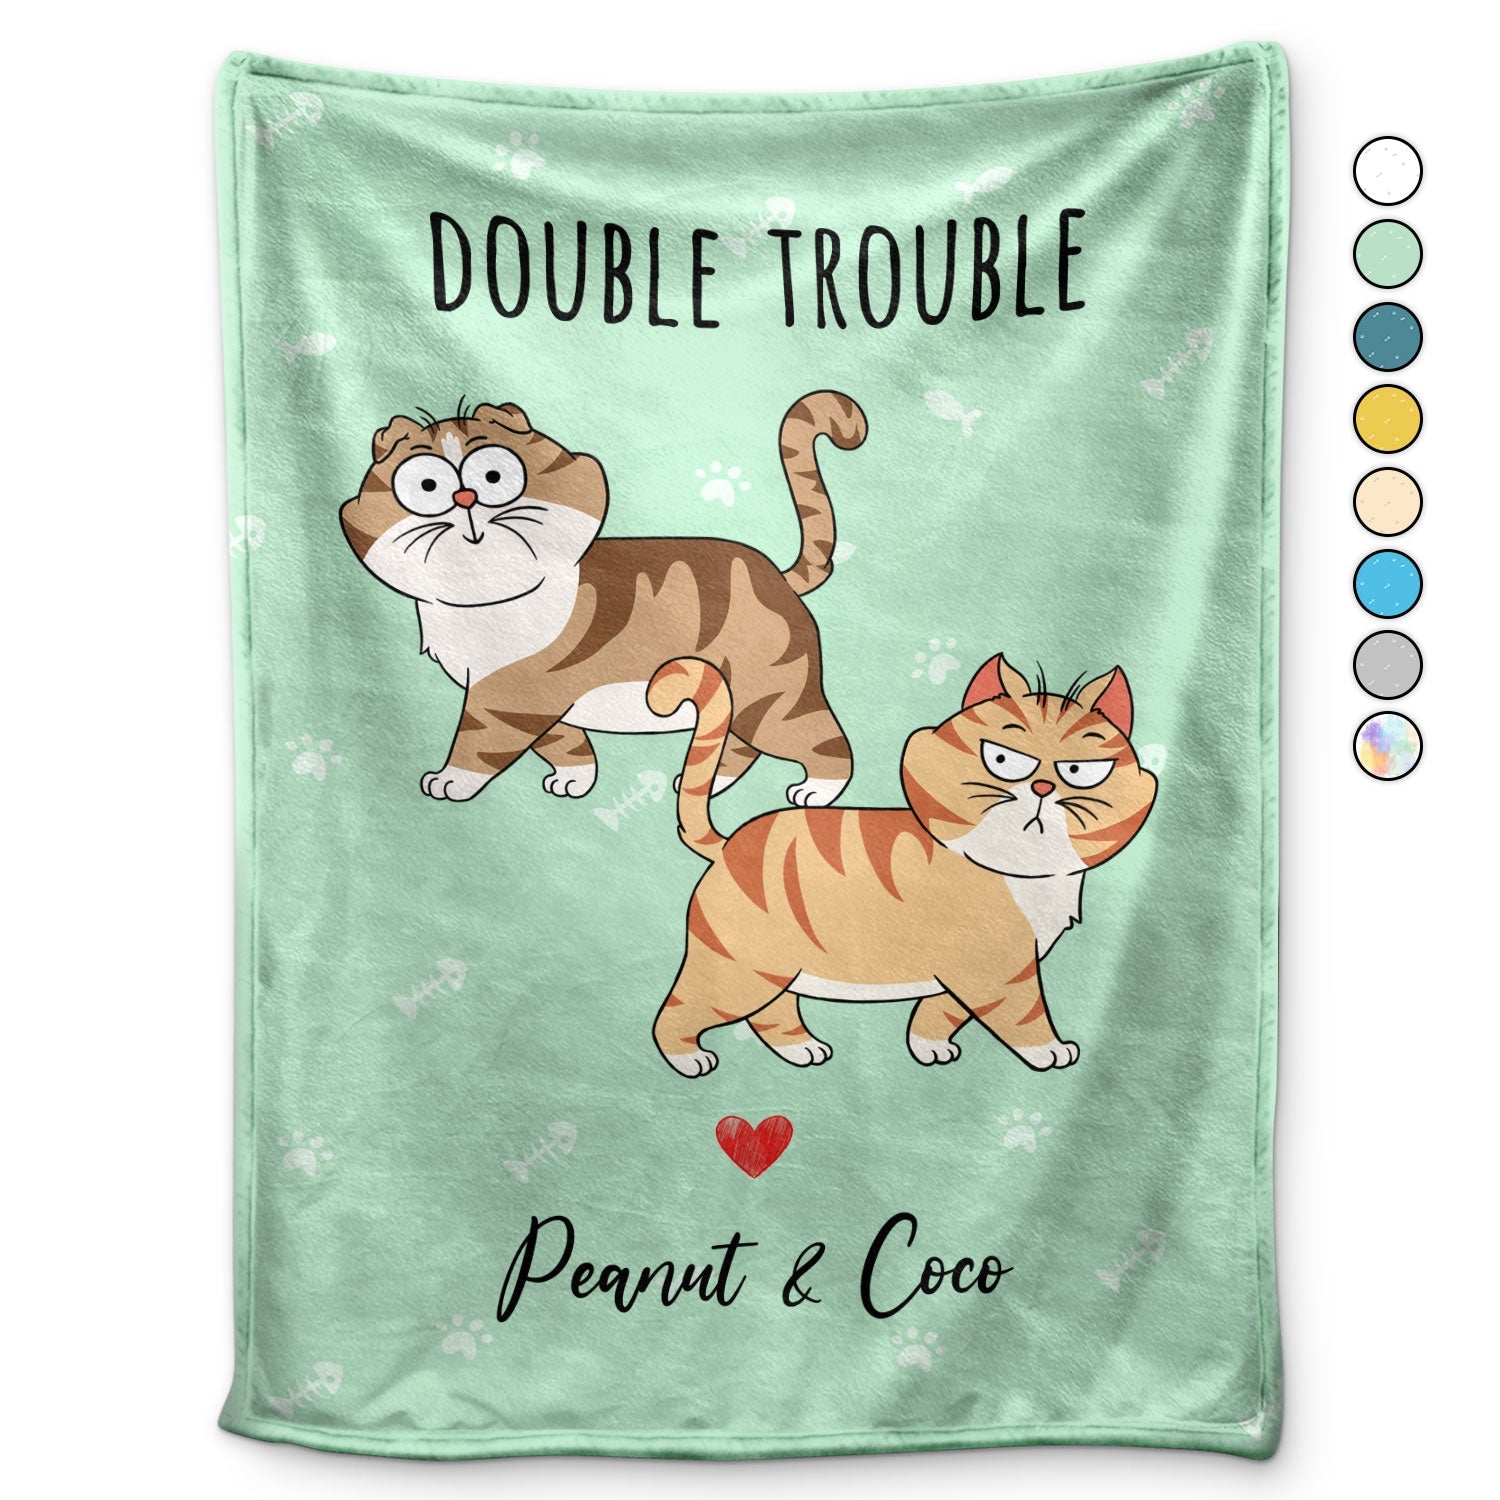 Funny Cartoon Cats Walking - Gift For Cat Lovers - Personalized Fleece Blanket